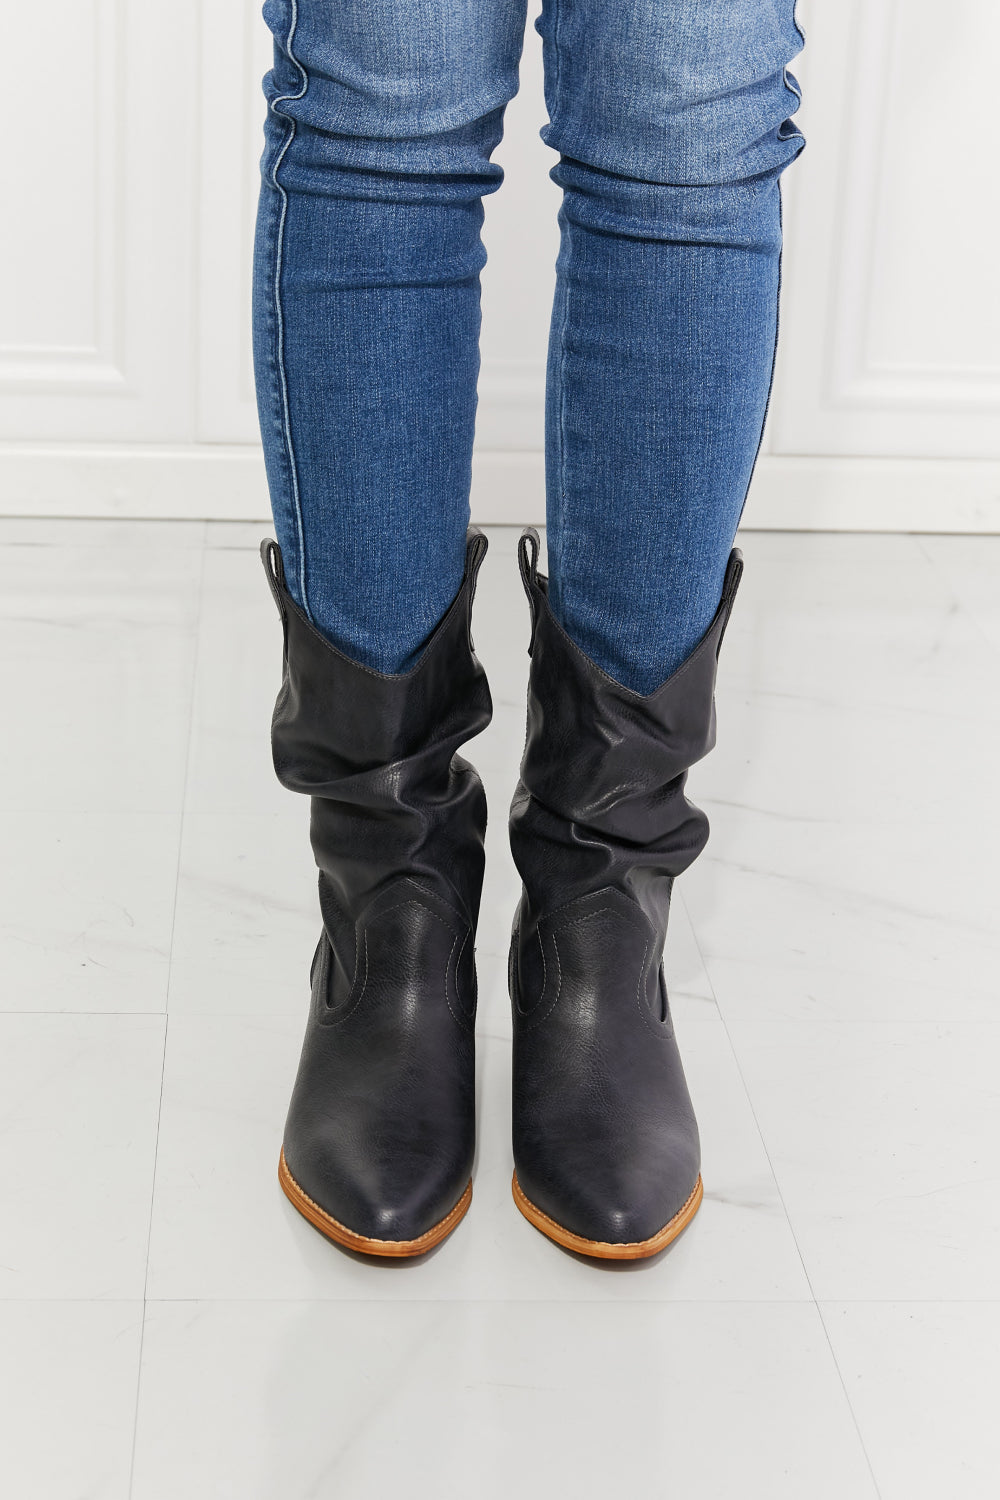 MMShoes Better in Texas Scrunch Cowboy Boots in Navy - BEAUTY COSMOTICS SHOP